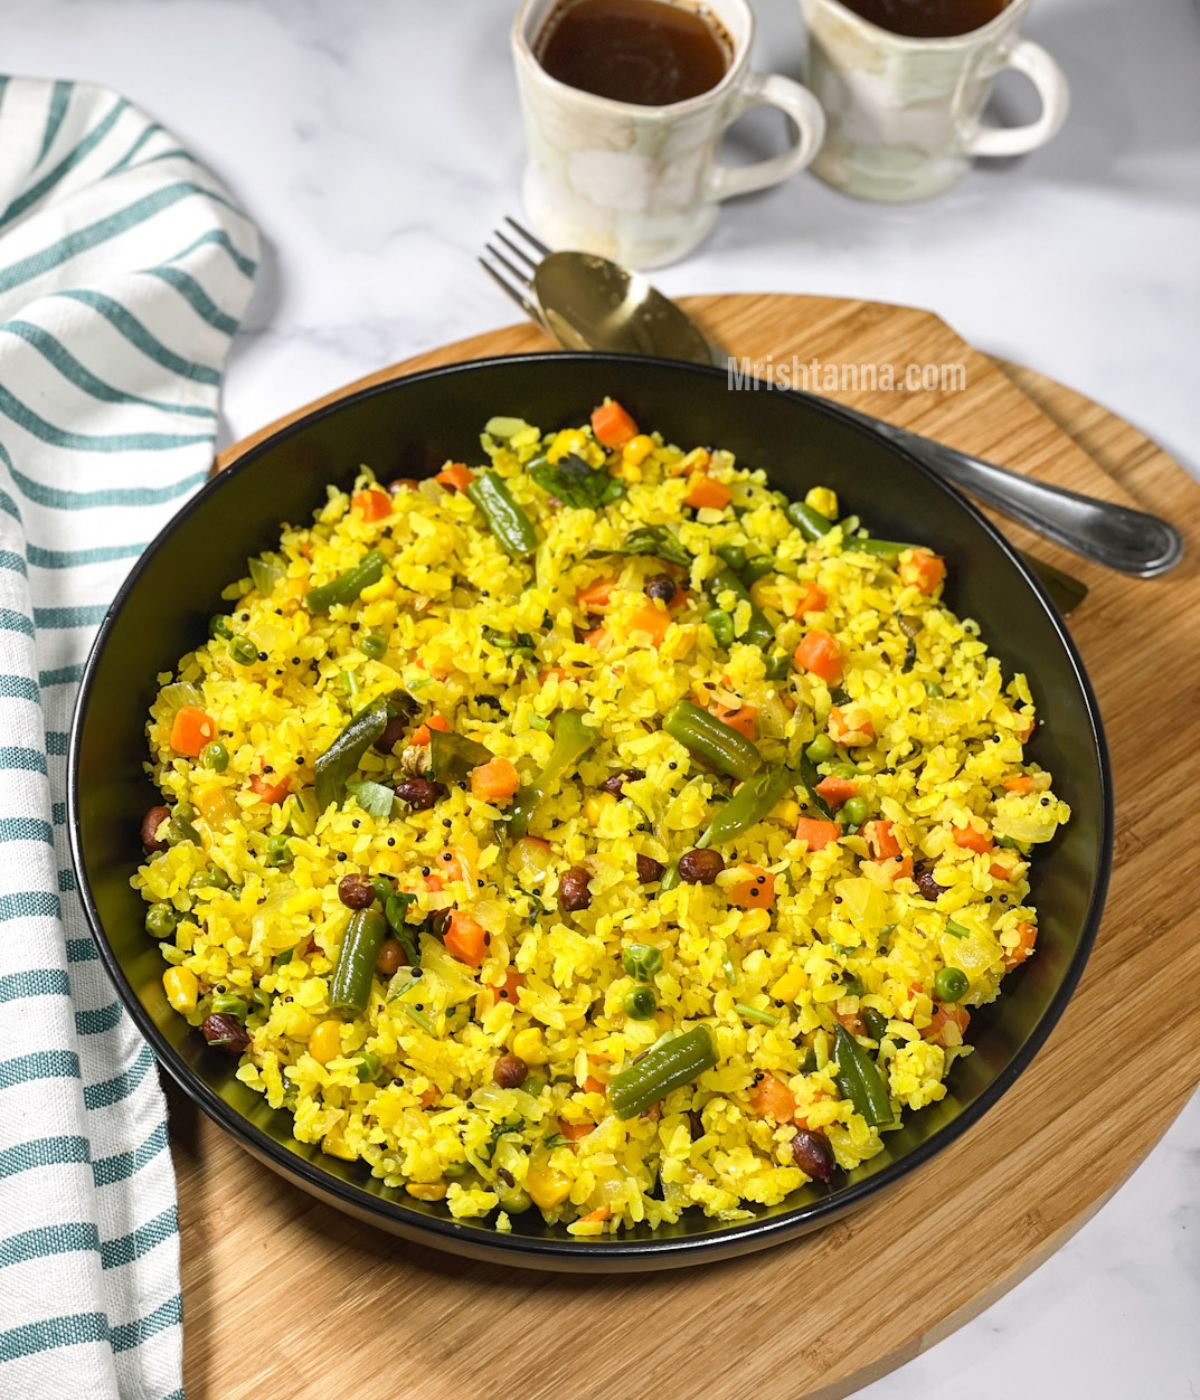 A plate is with vegetable poha and plcae don the wooden tray with a spoon.